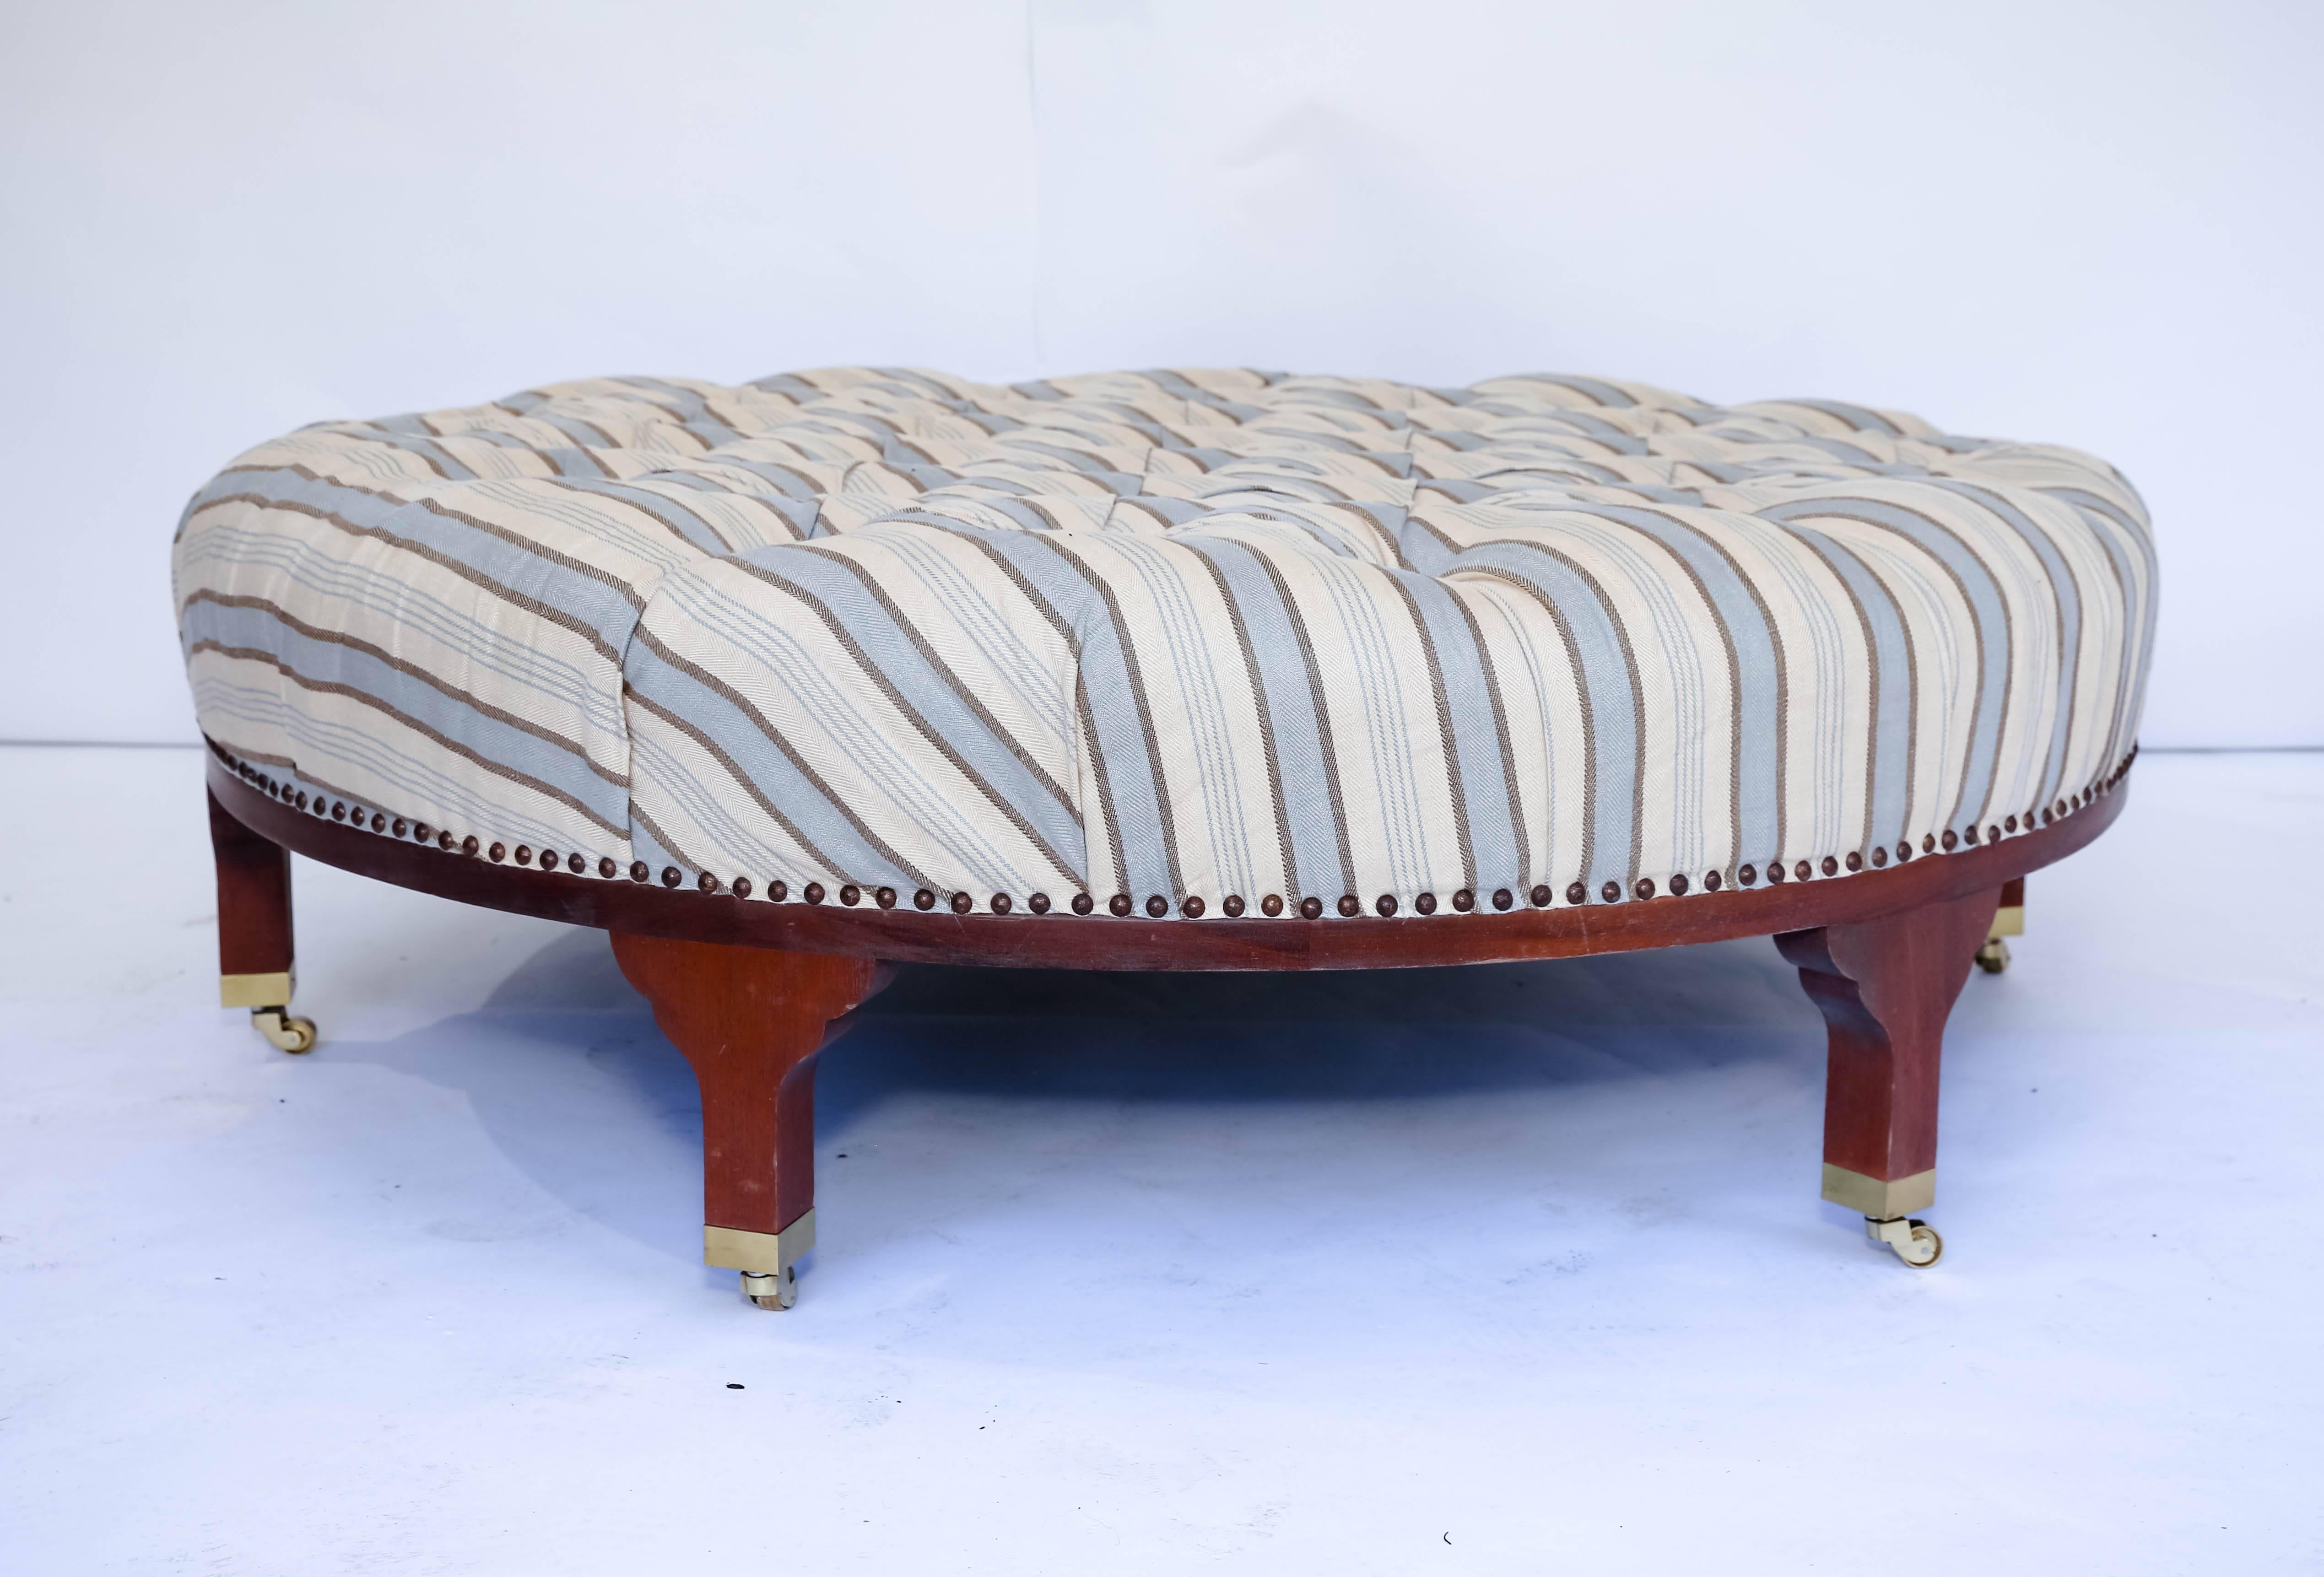 Round tufted ottoman or coffee table in striped linen upholstery. Wooden base set upon brass casters.   

